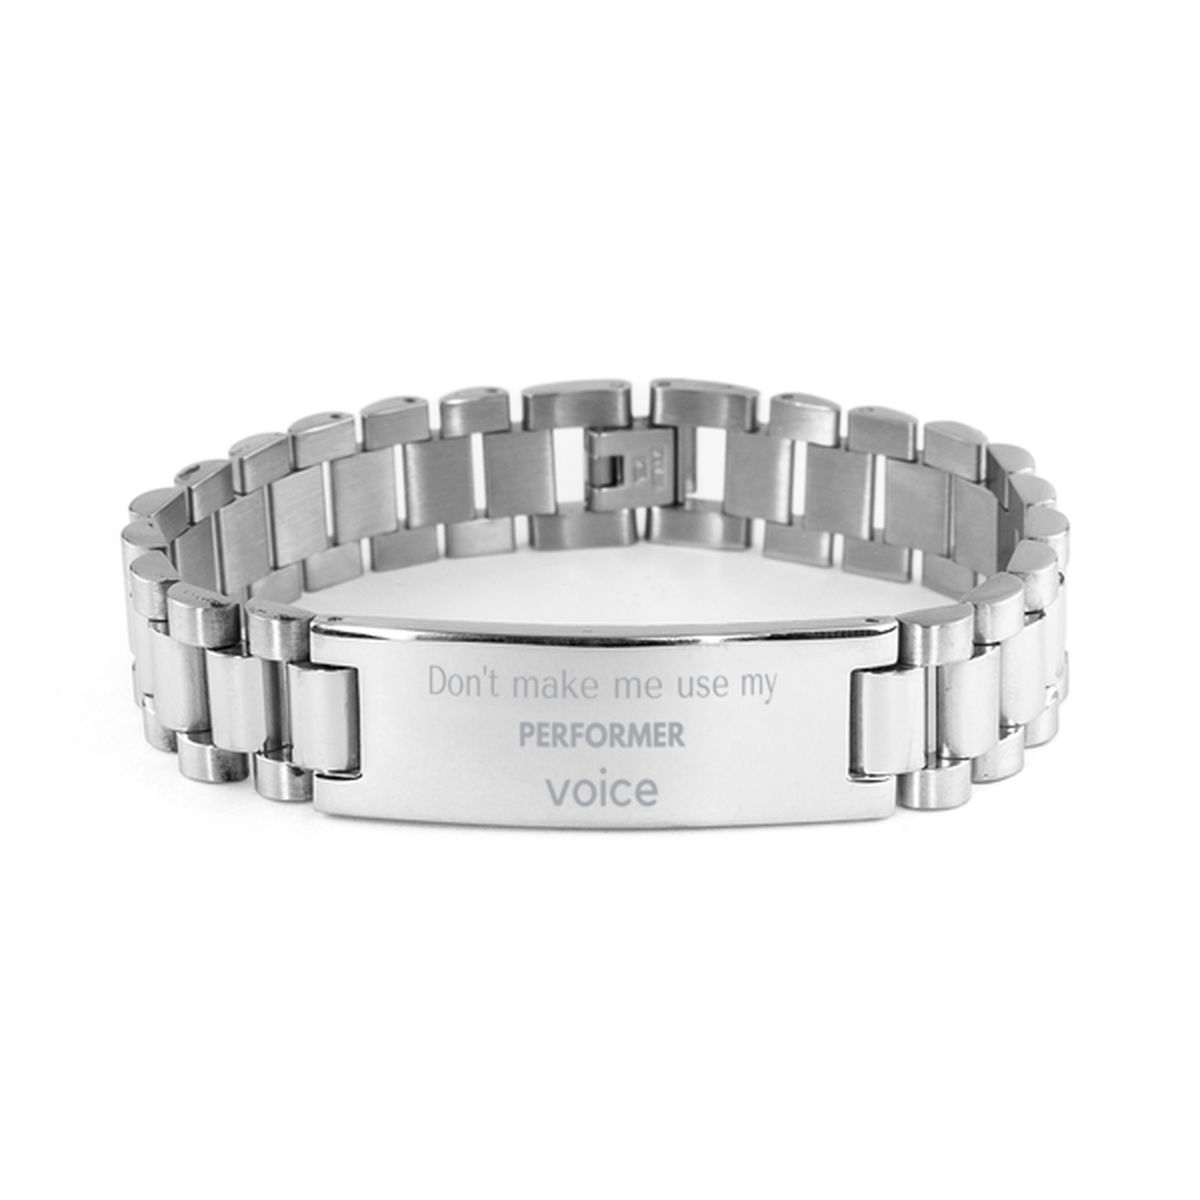 Don't make me use my Performer voice, Sarcasm Performer Gifts, Christmas Performer Ladder Stainless Steel Bracelet Birthday Unique Gifts For Performer Coworkers, Men, Women, Colleague, Friends